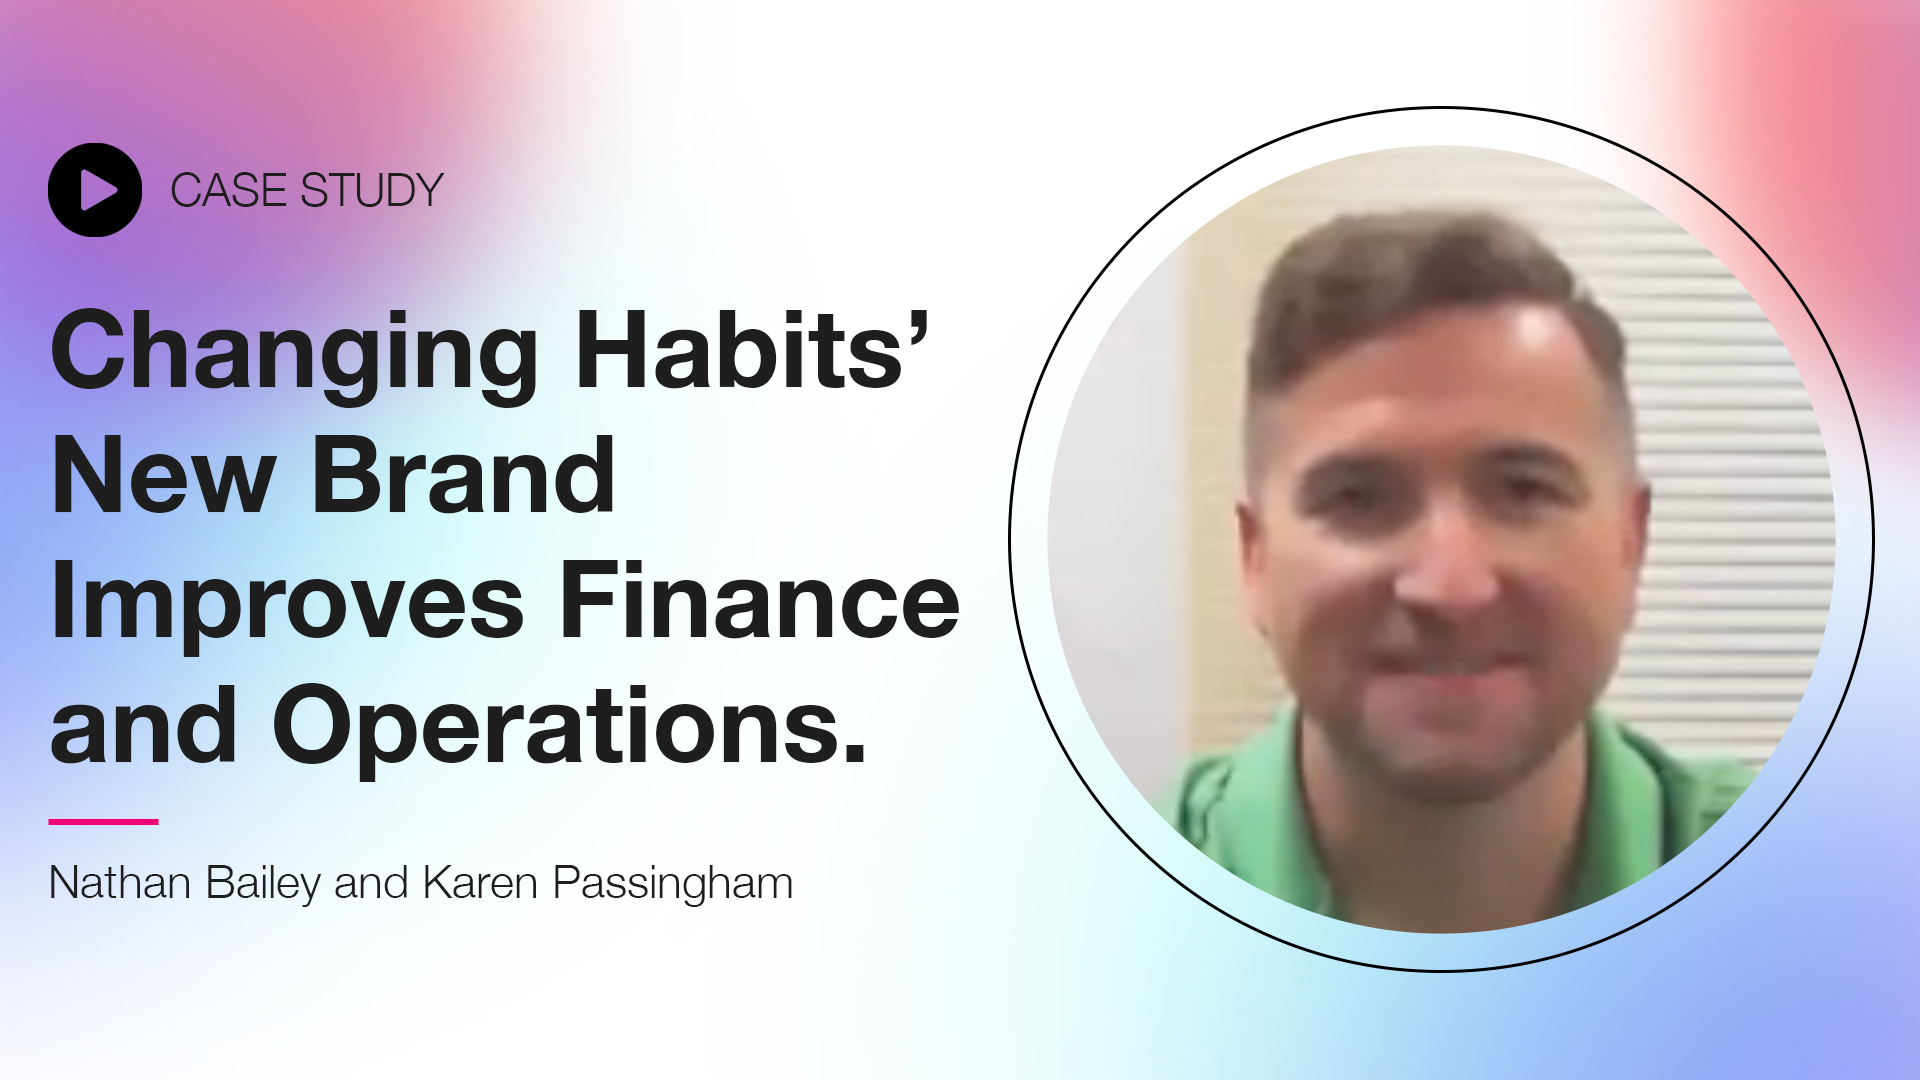 Nathan Bailey of Changing Habits talks about how their new brand had an impact on their finances and operations